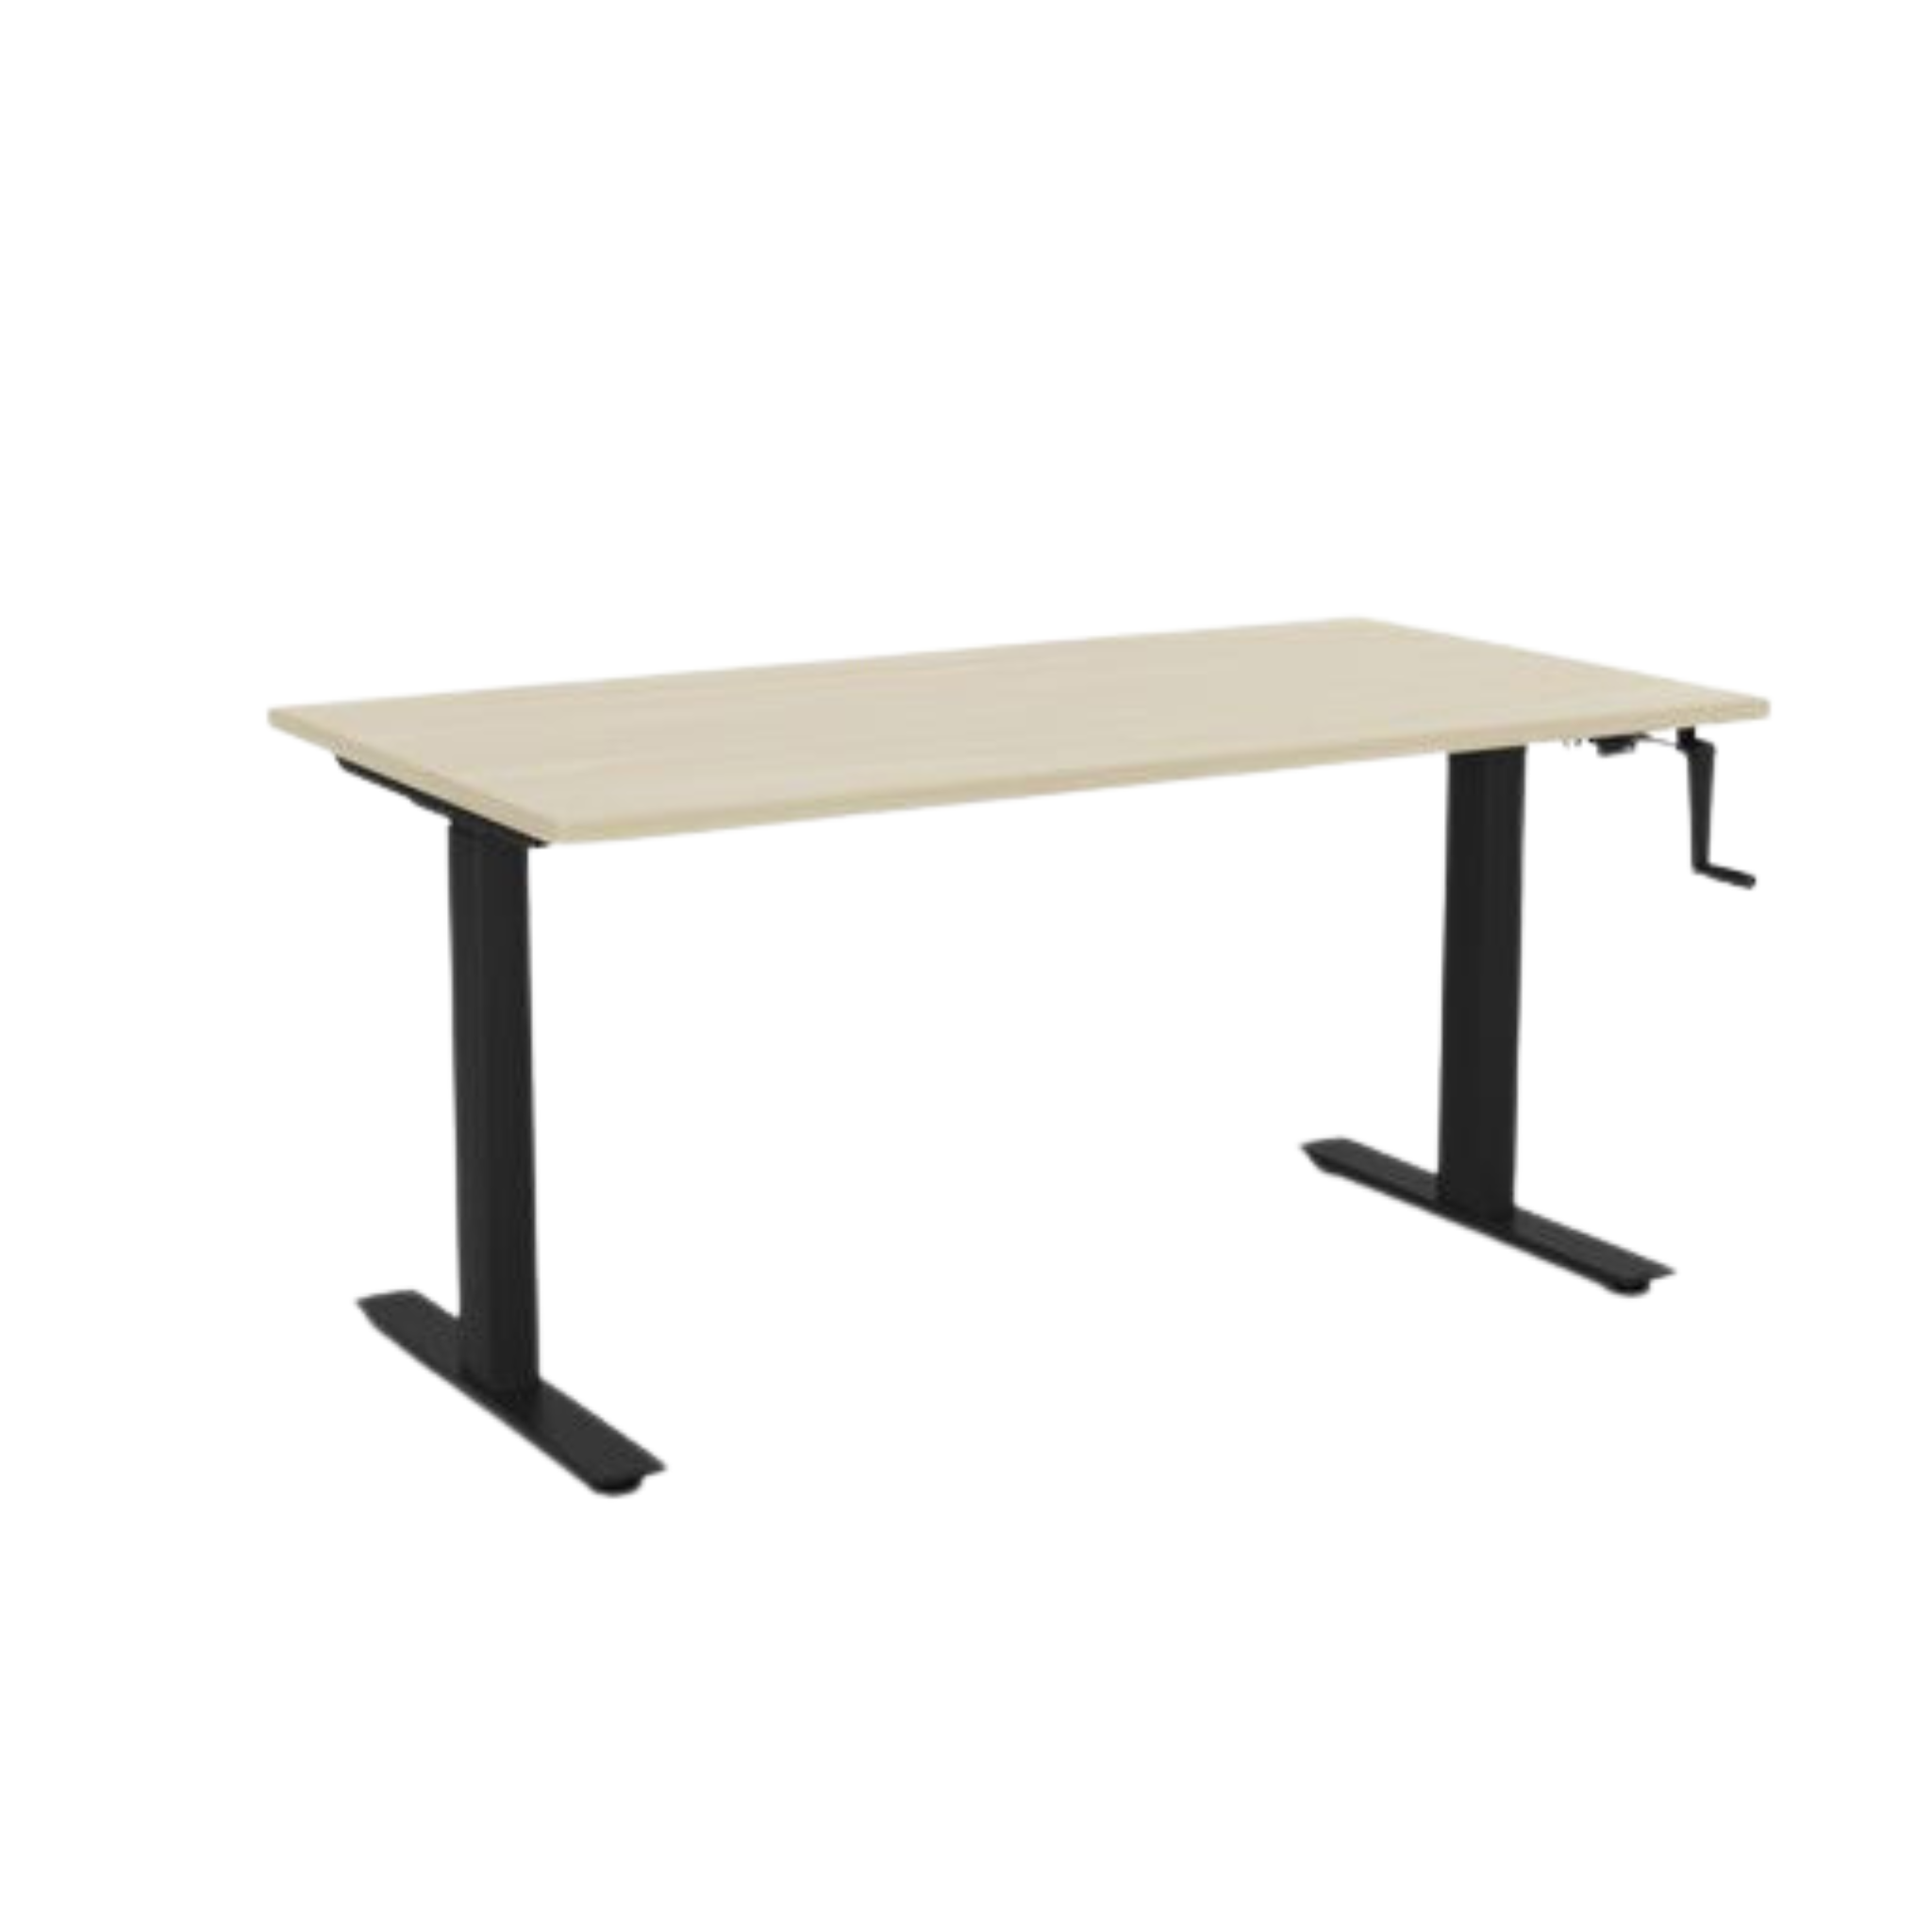 Agile winder sit to stand desk with black frame and nordic maple top